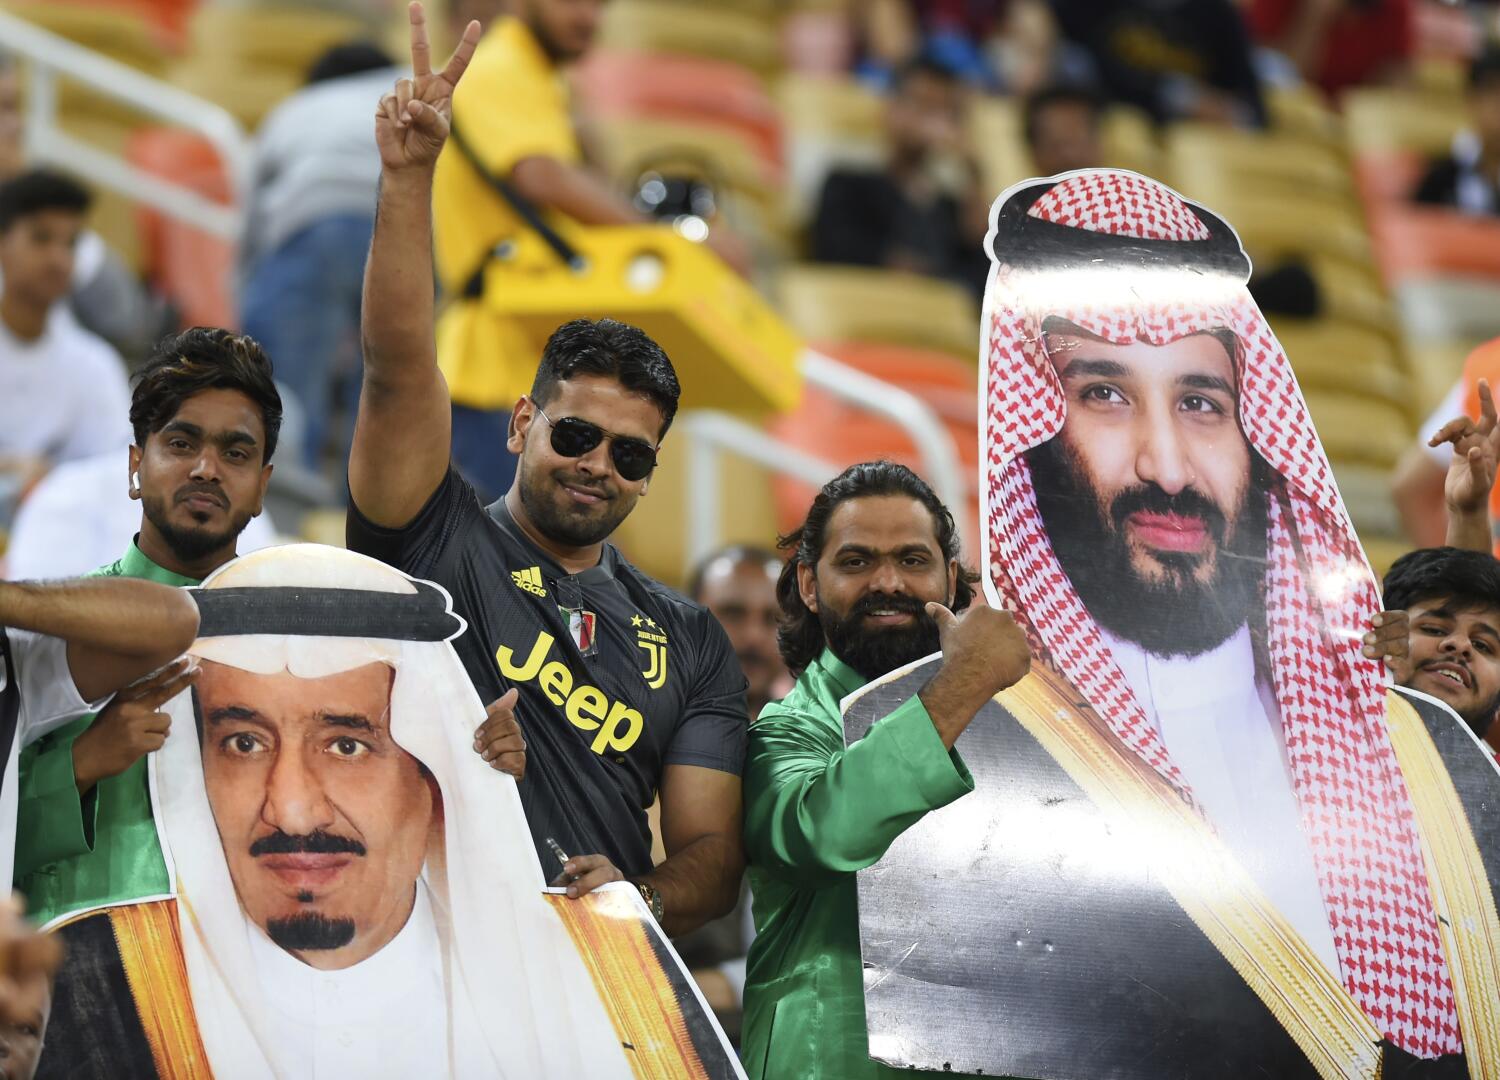 with oil funds and formula one, saudi arabia steamrolls its way onto sports' hallowed grounds